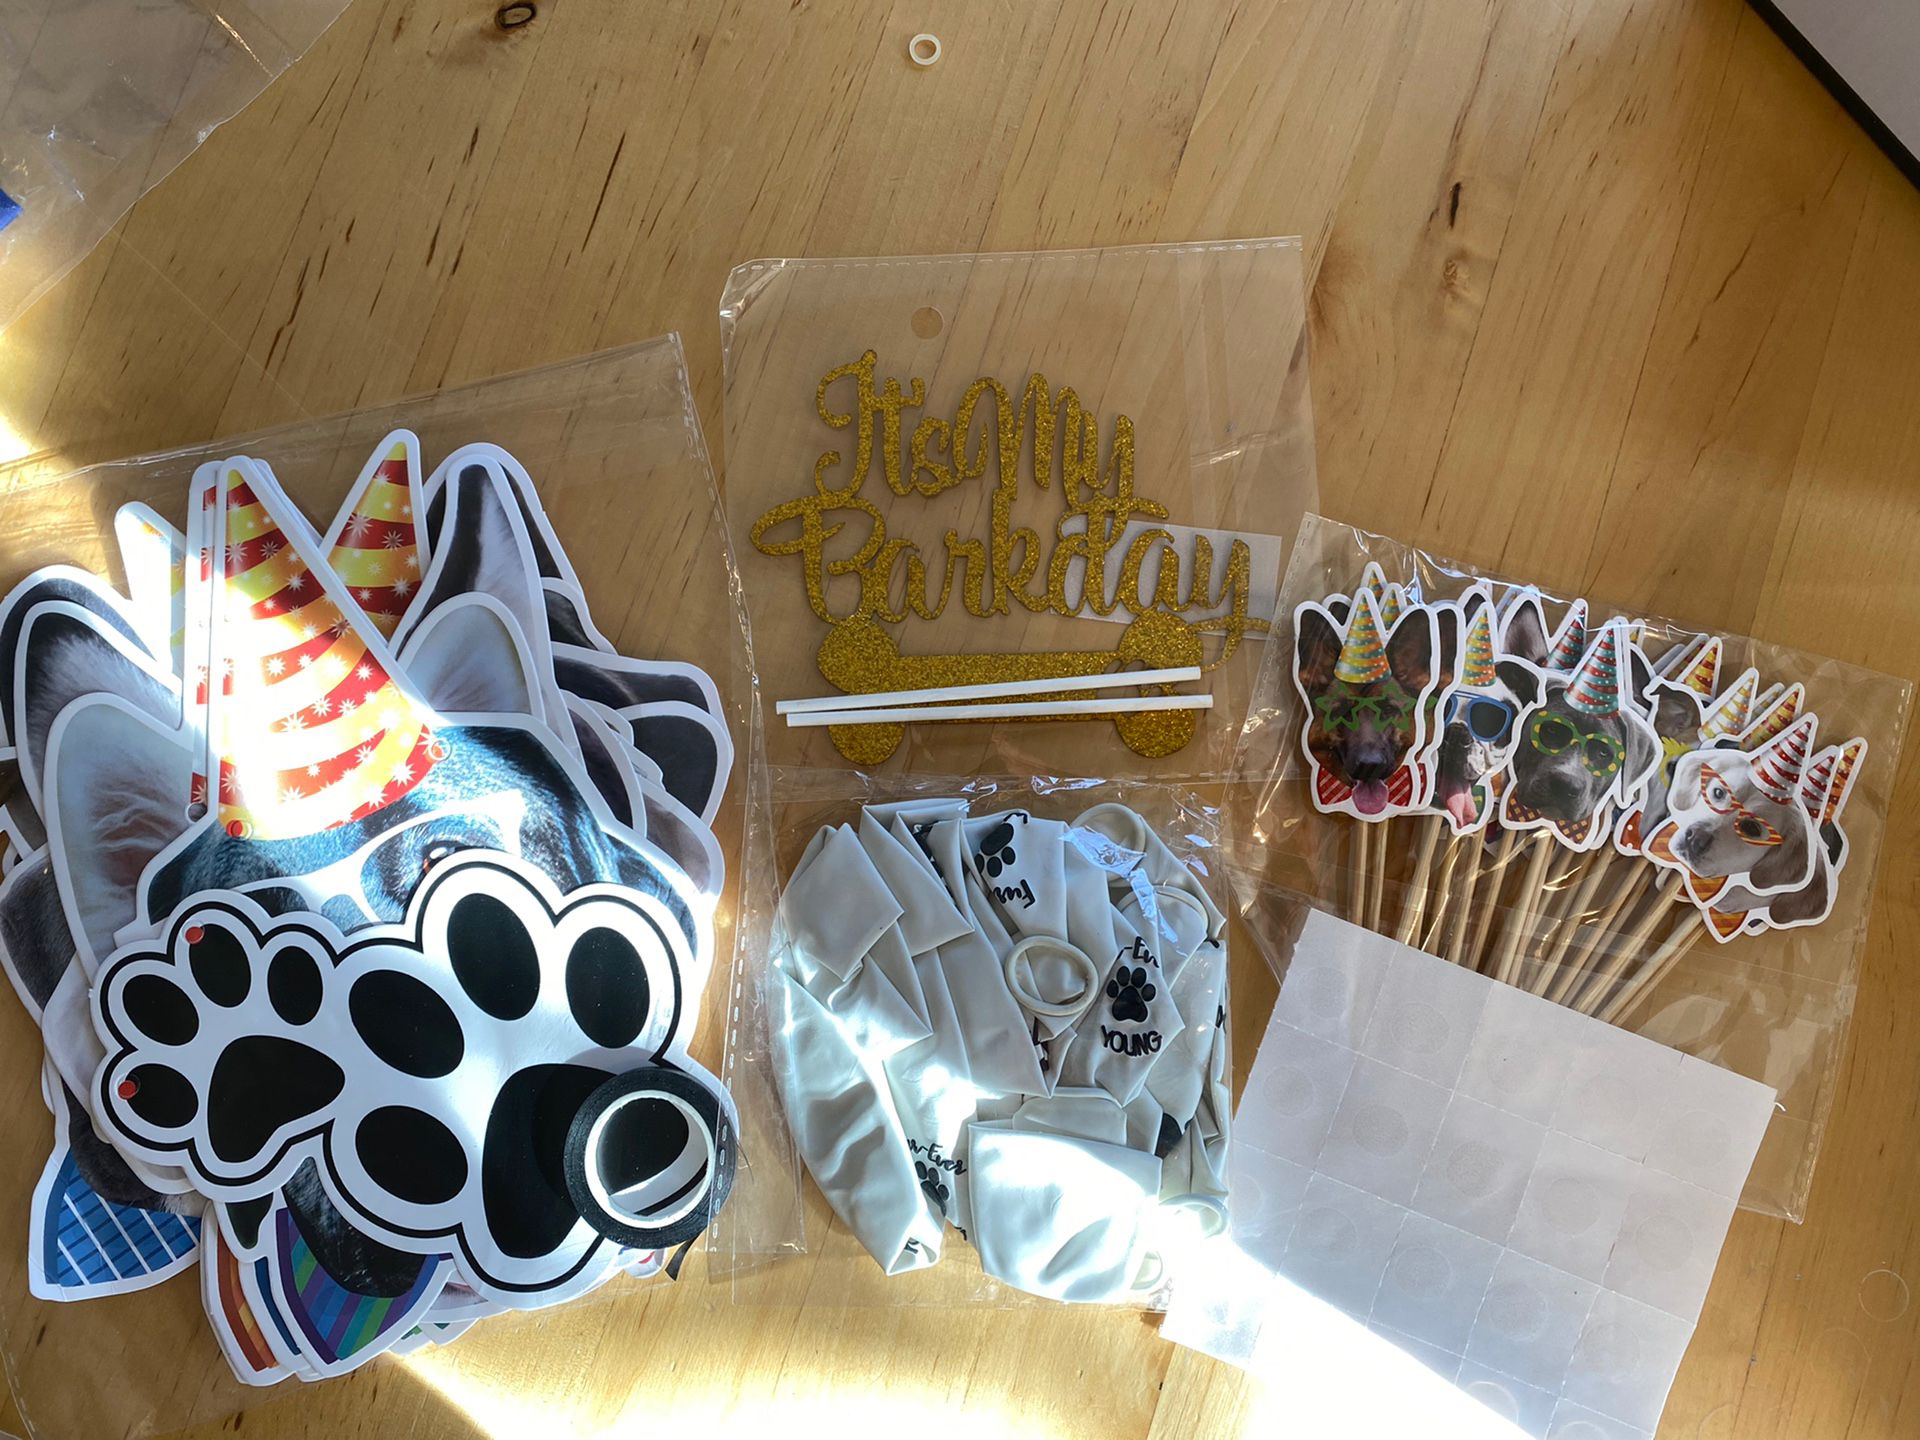 Its My Barkday Party Supplies - Dog Banner & Cupcake Toppers, Cake Topper & Fur-Ever Young Balloons